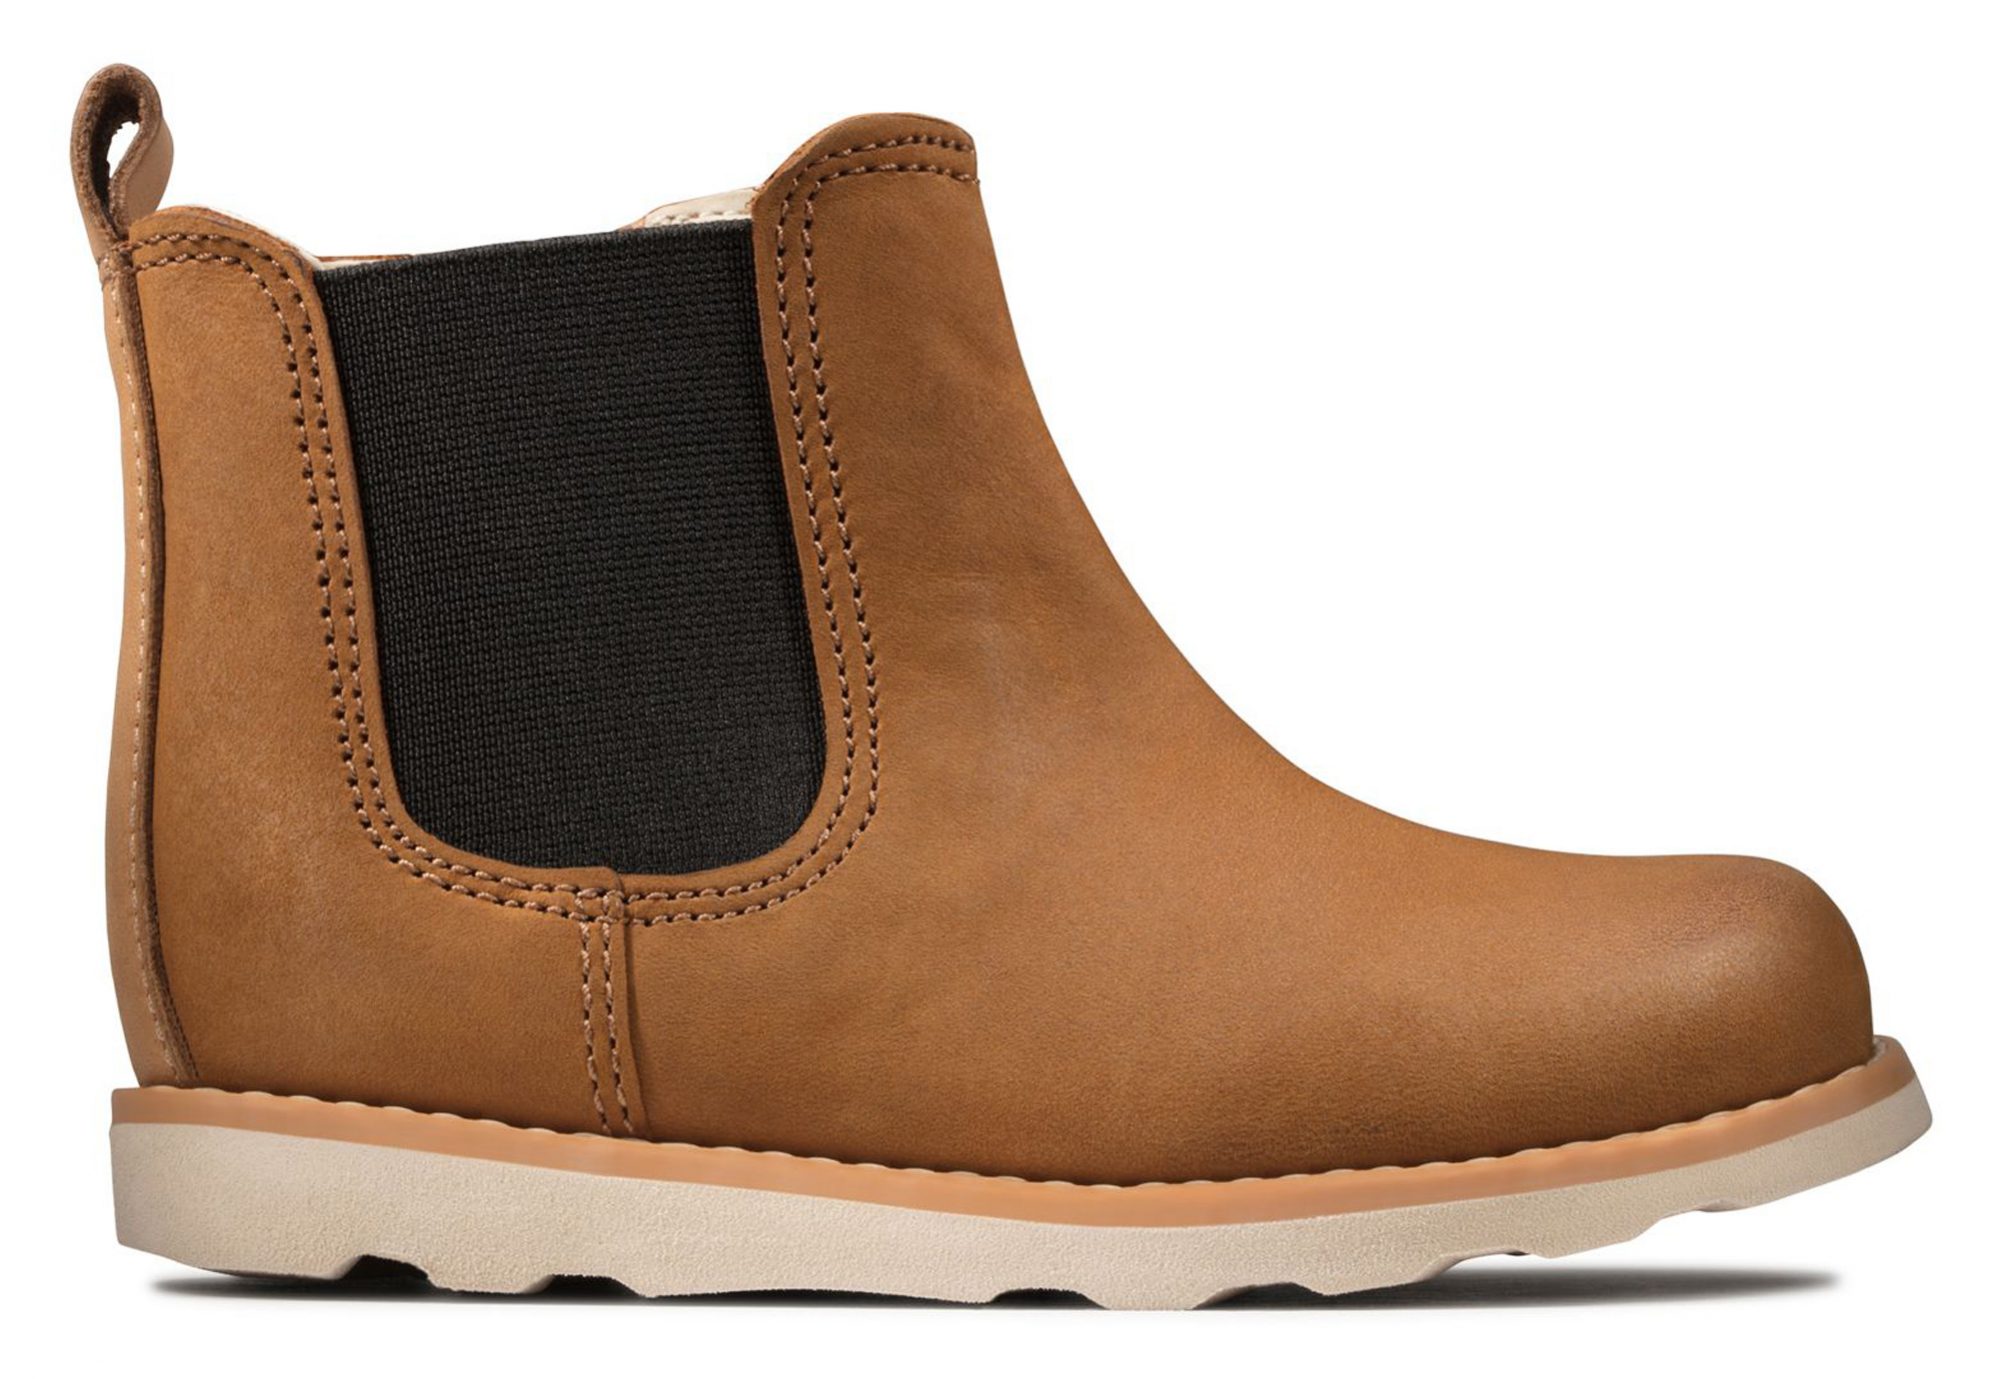 Clarks Boys Ankle Boots 'Crown Halo' 